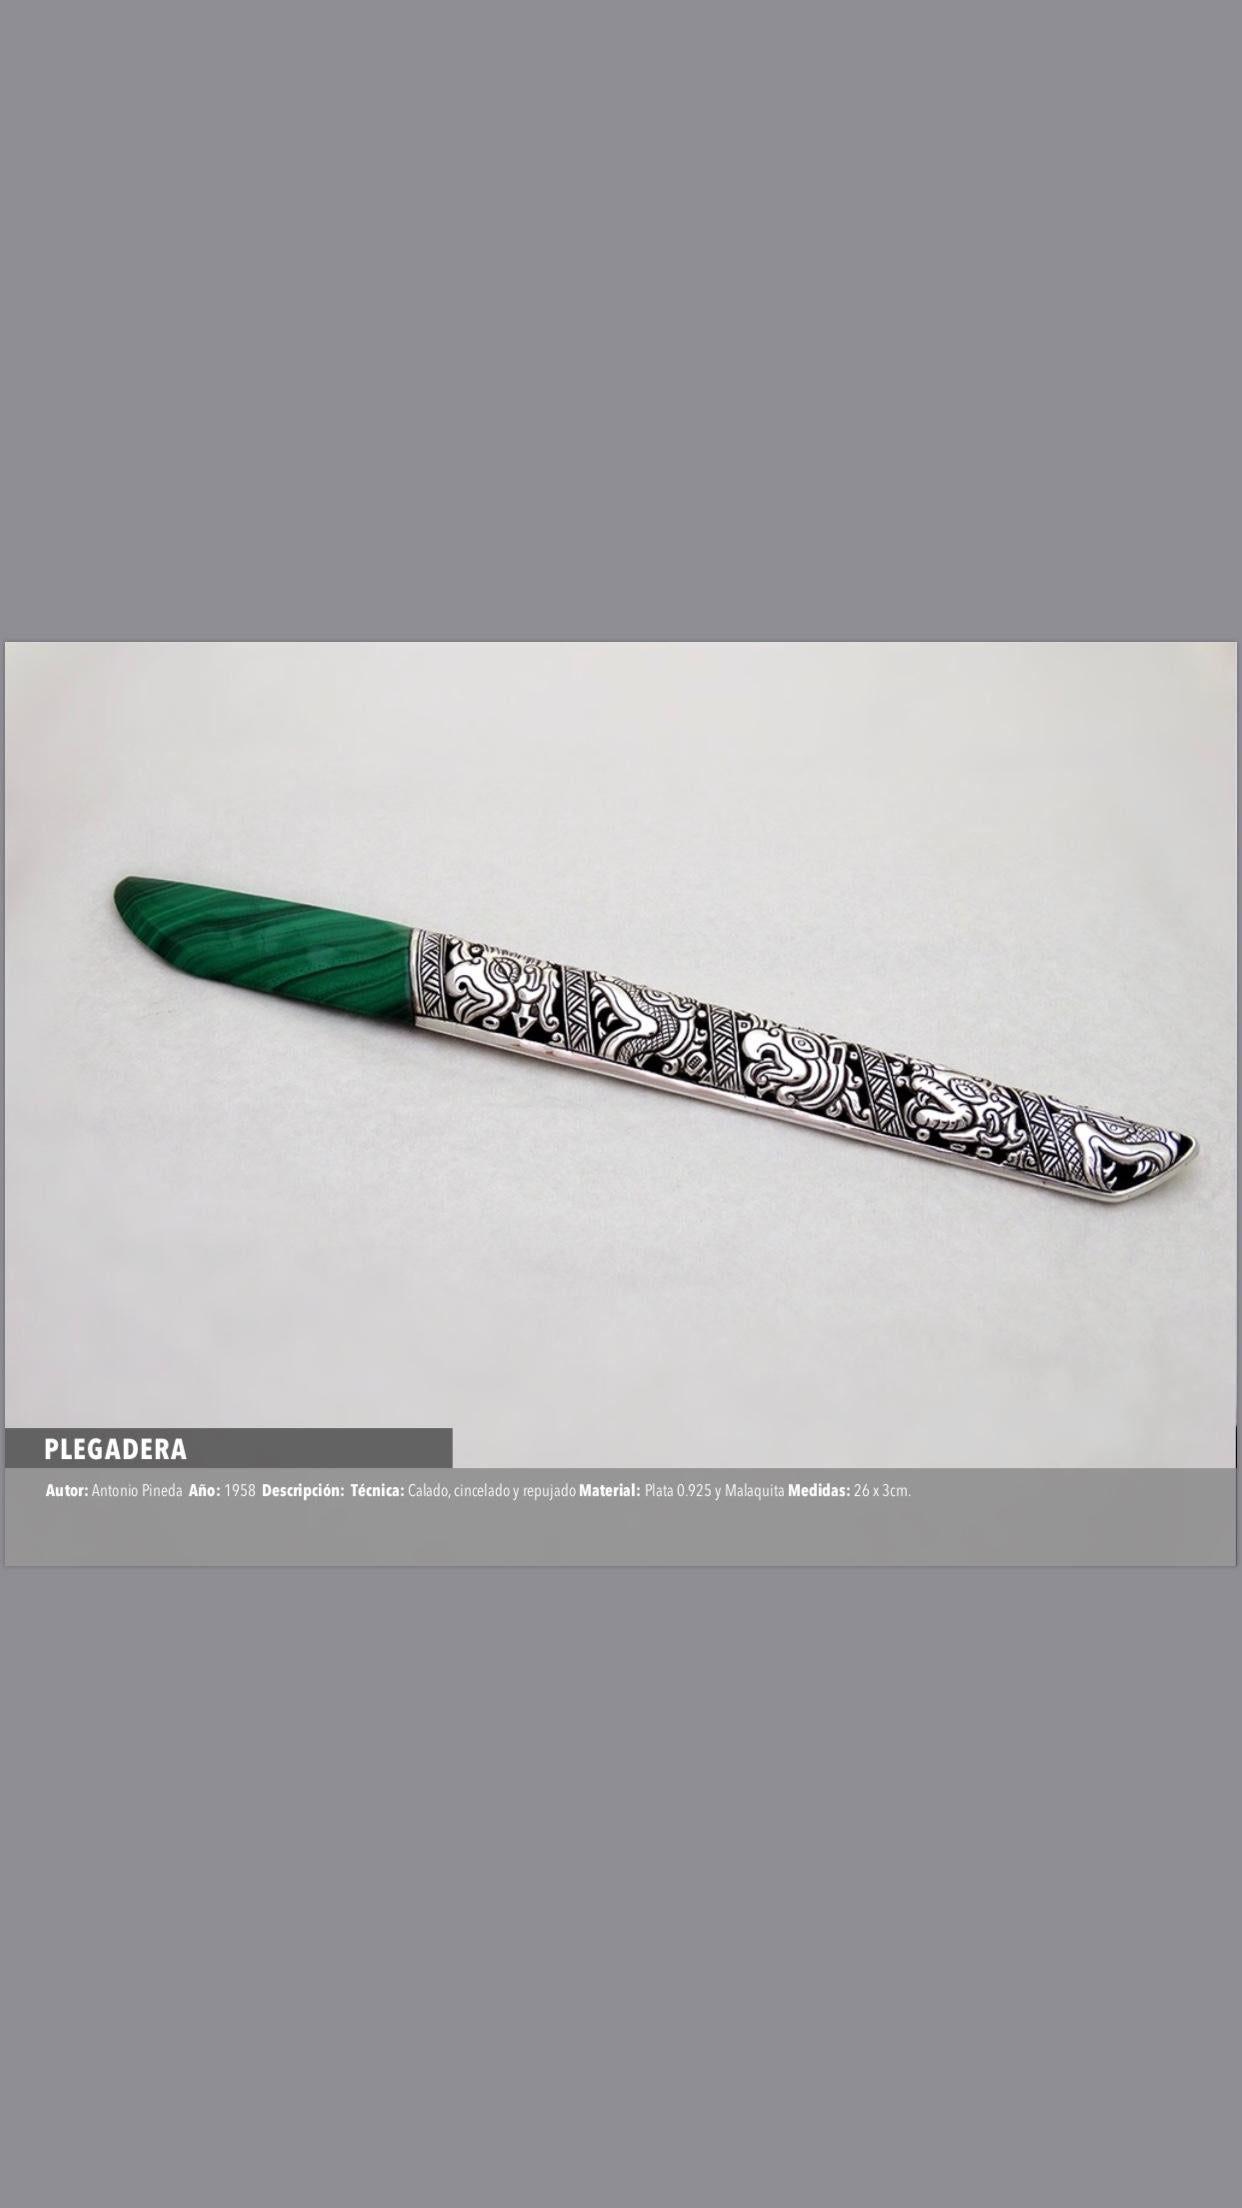 Silver and malachite folding, with chiseled Mayan details on the handle. 1958